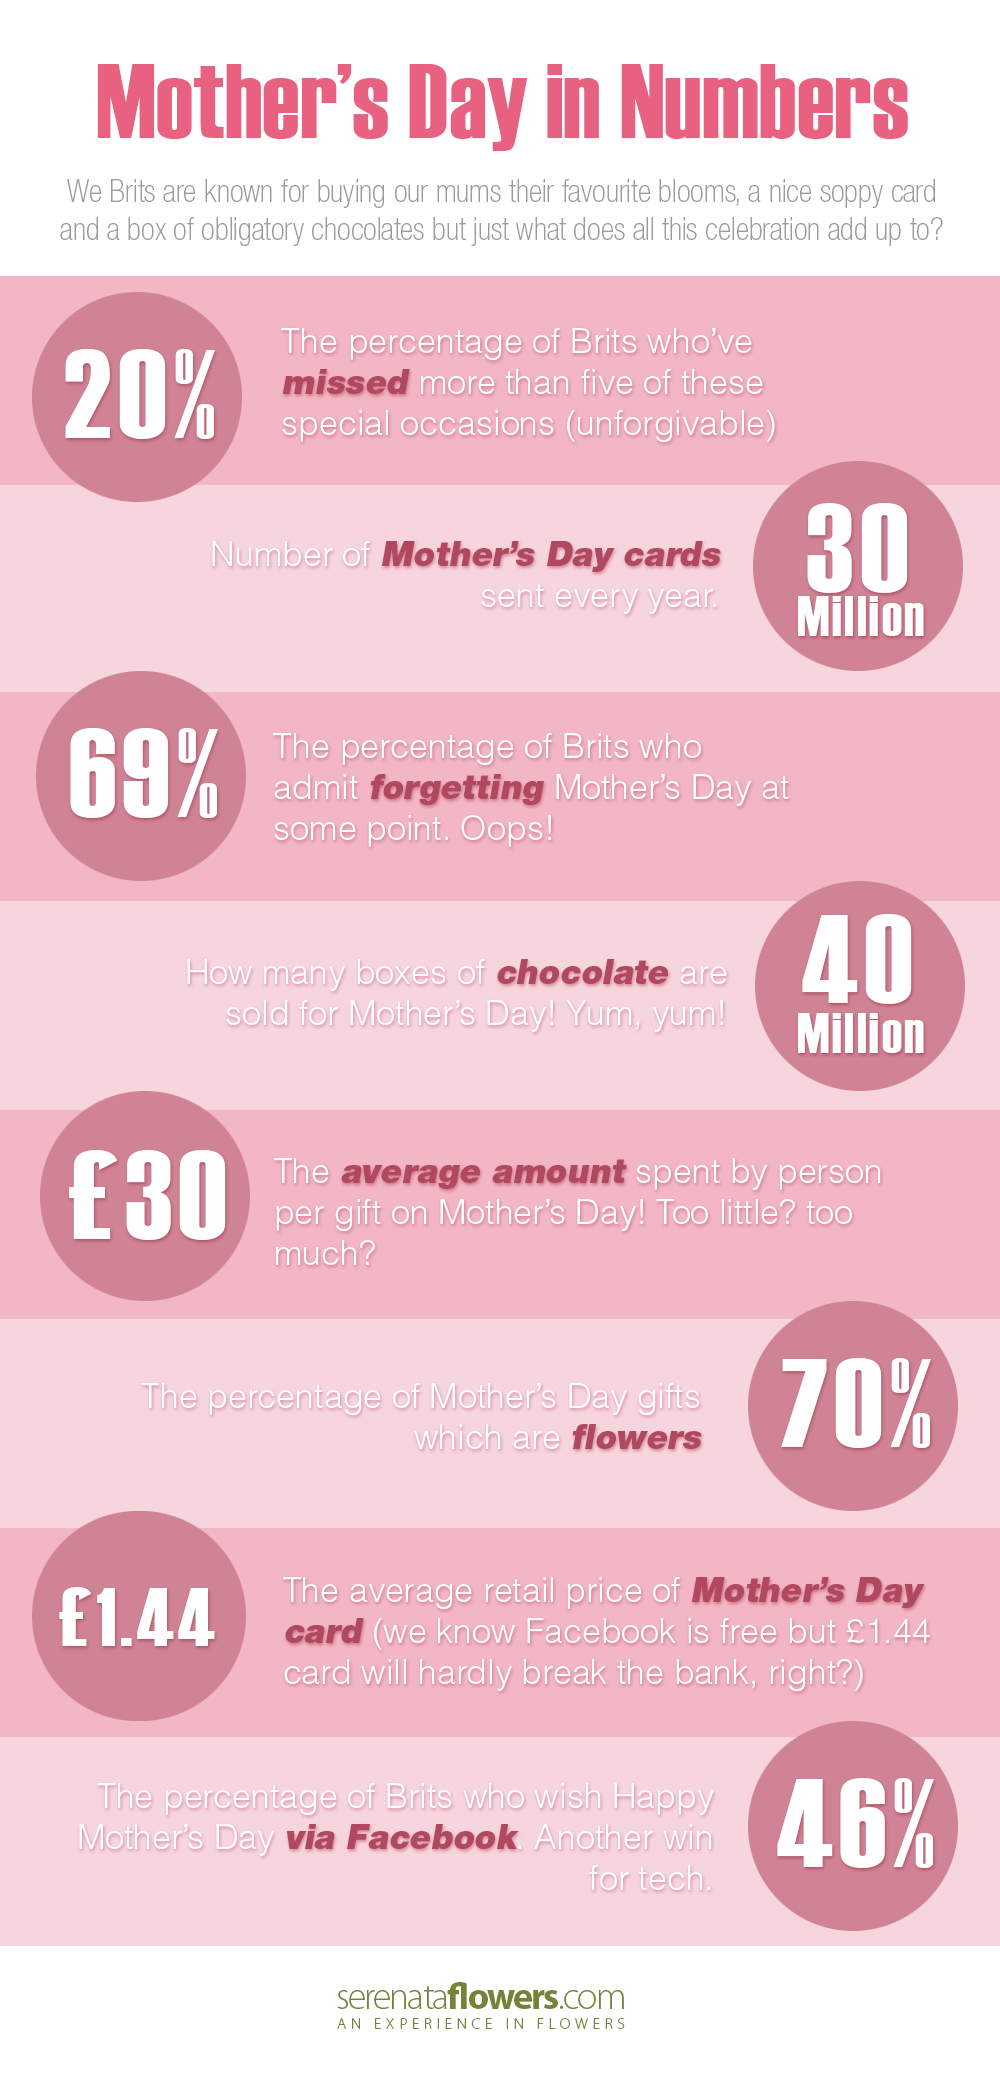 mothers-day-in-numbers